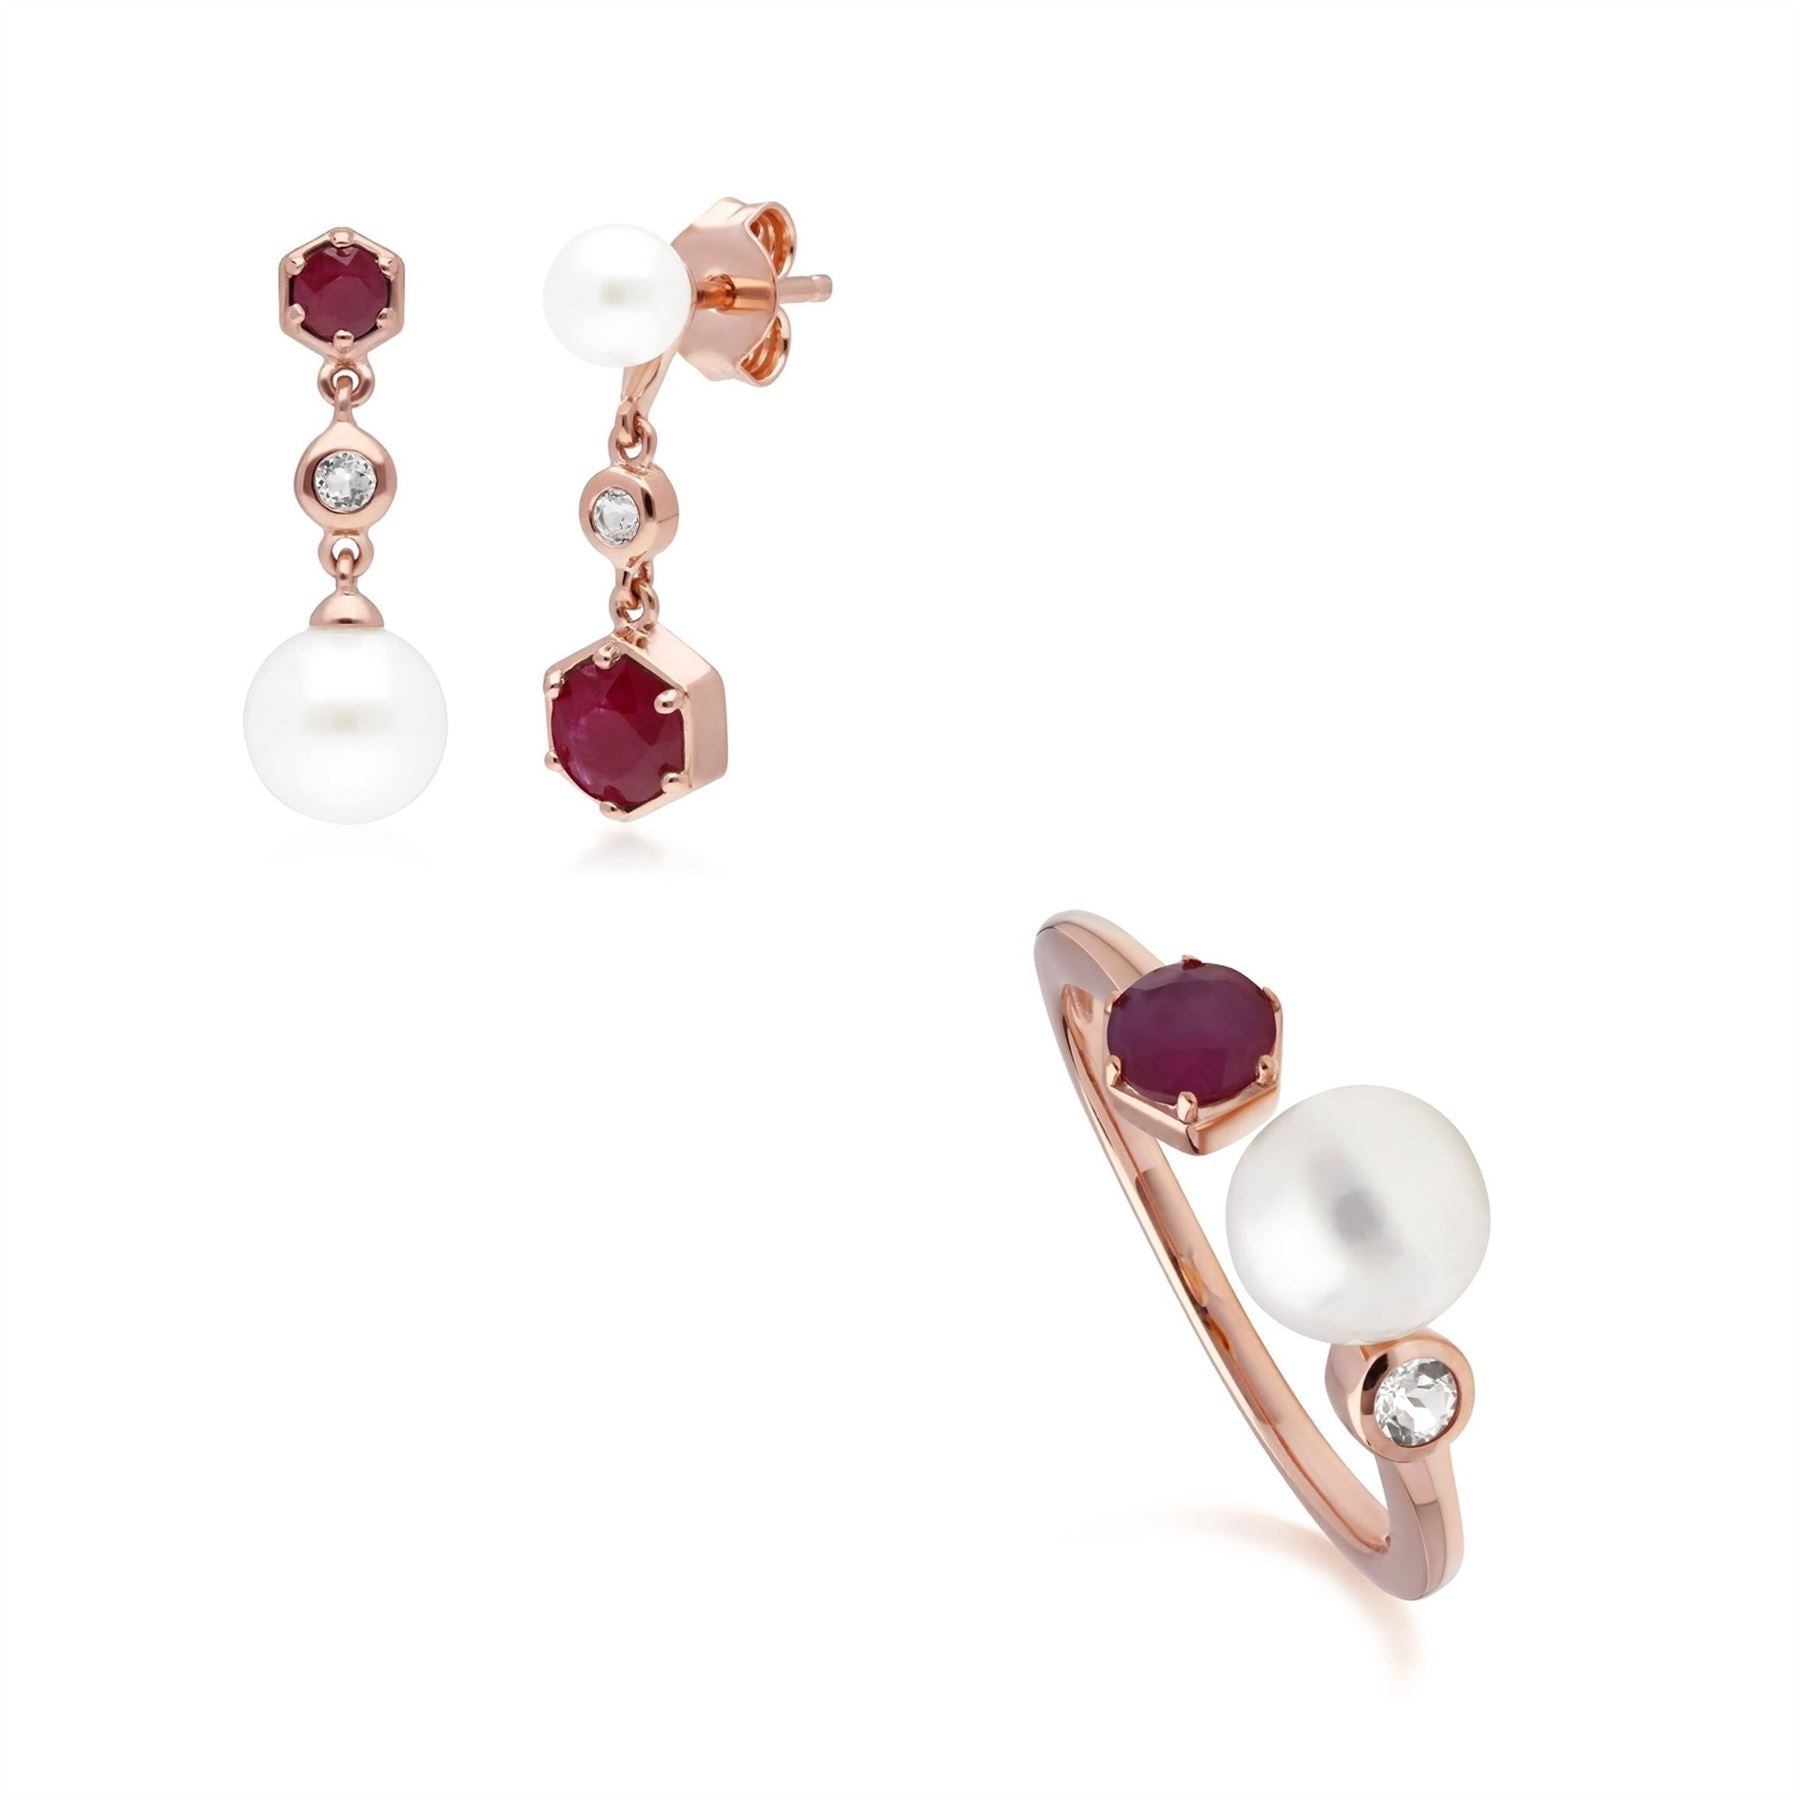 Modern Pearl, Ruby & Topaz Earring & Ring Set in Rose Gold Plated Sterling Silver